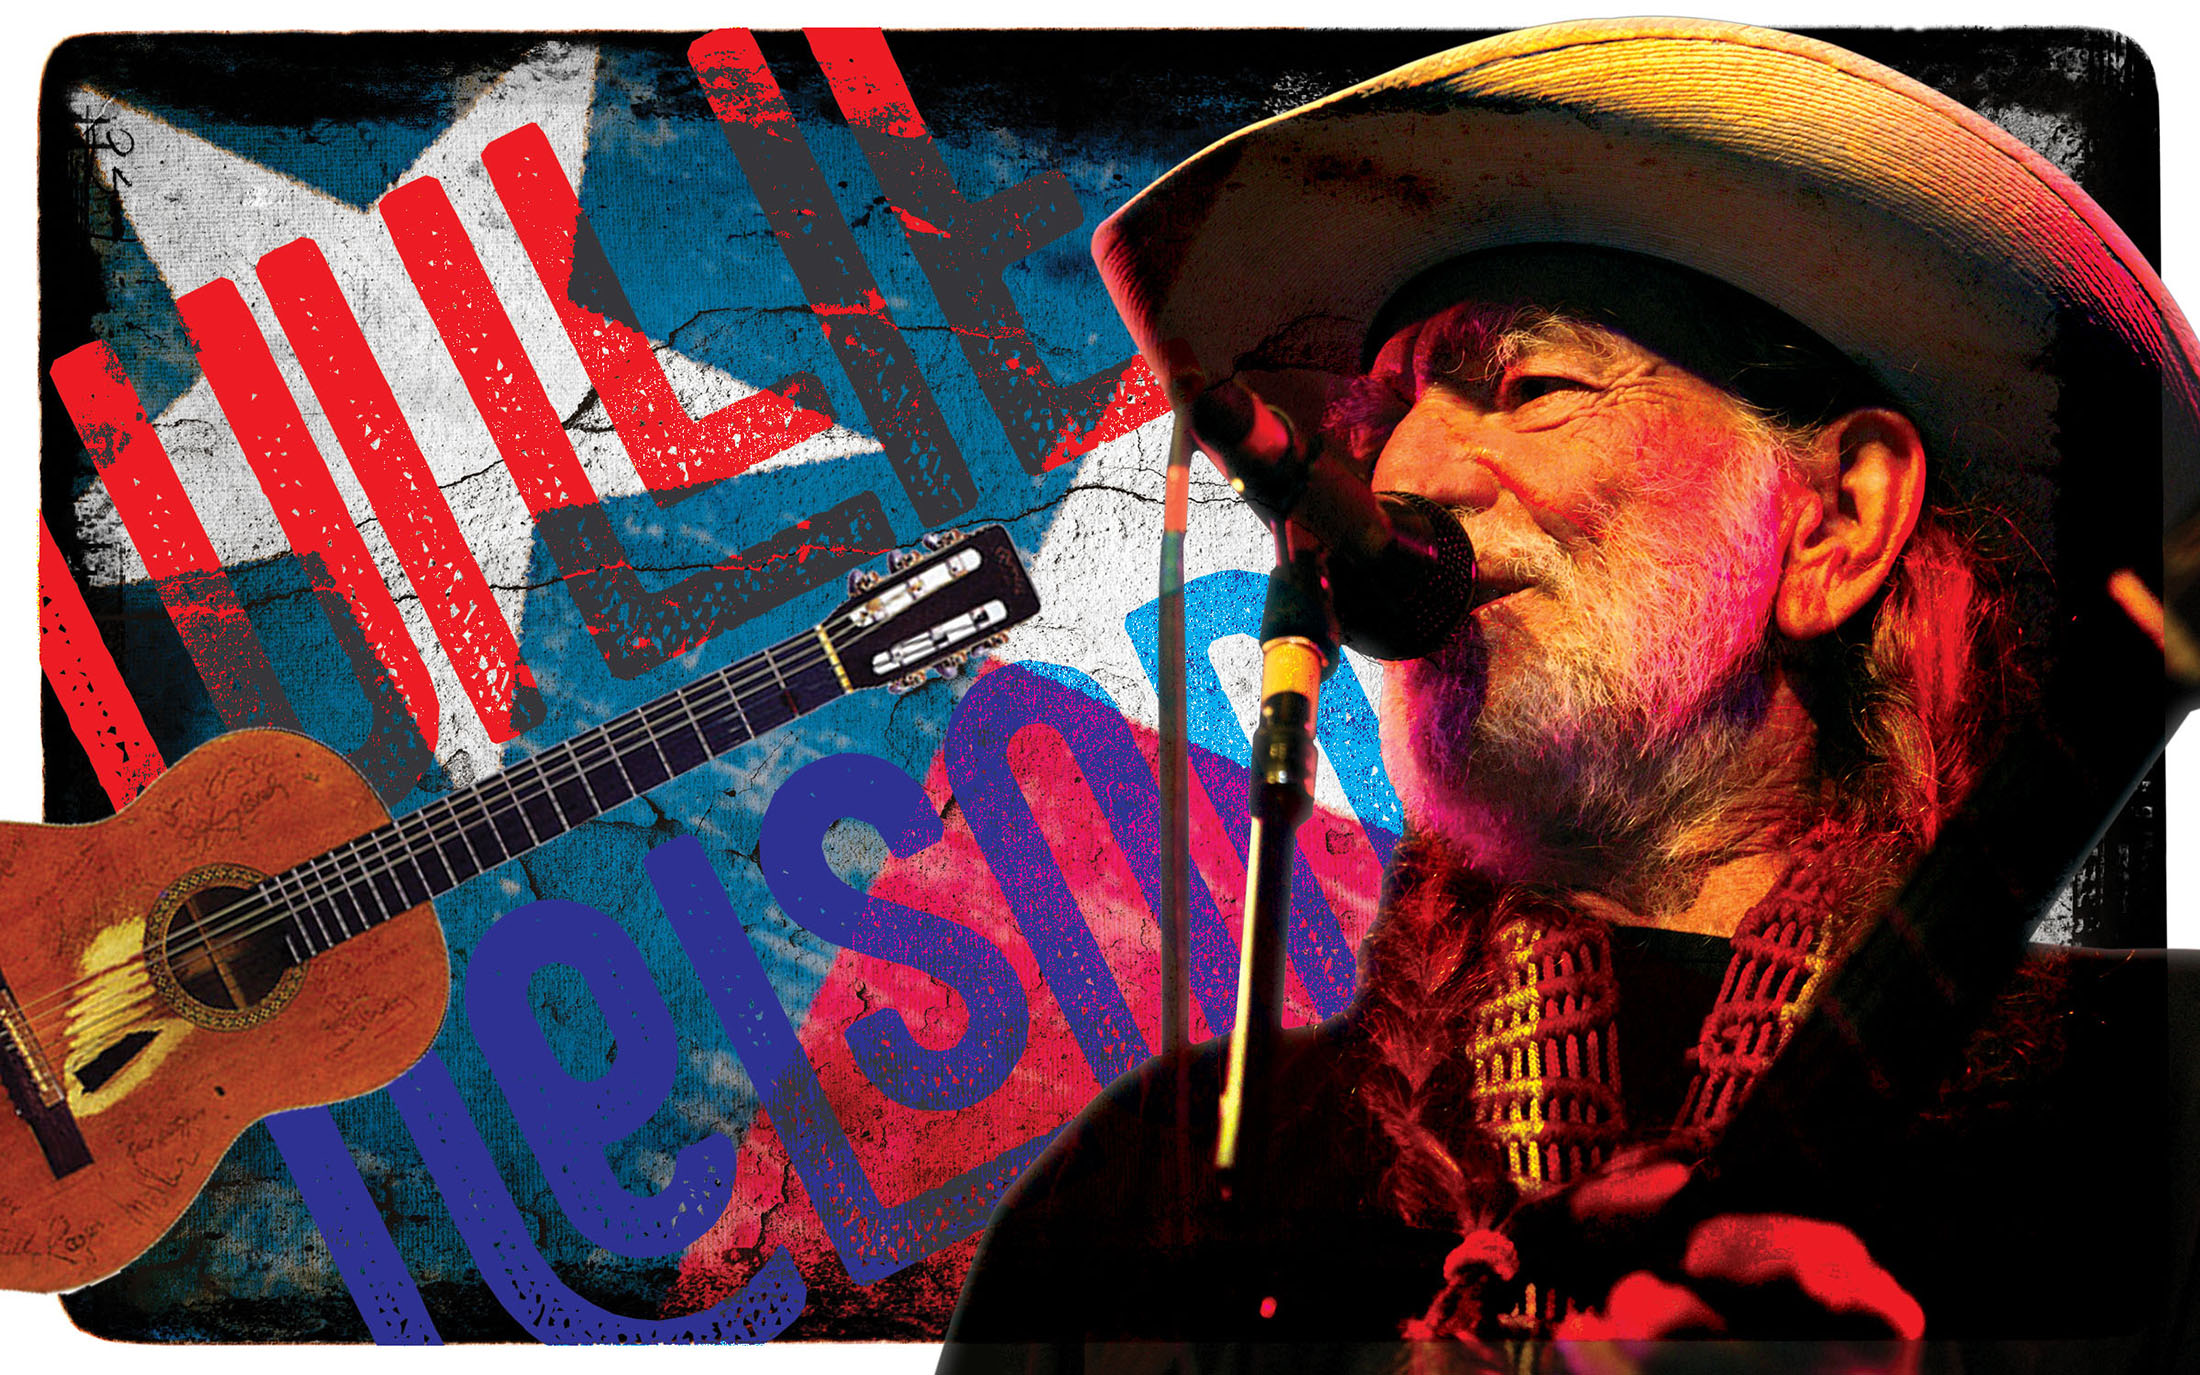 A photo illustration of Willie Nelson singing into a microphone with a guitar and Texas flag in the background